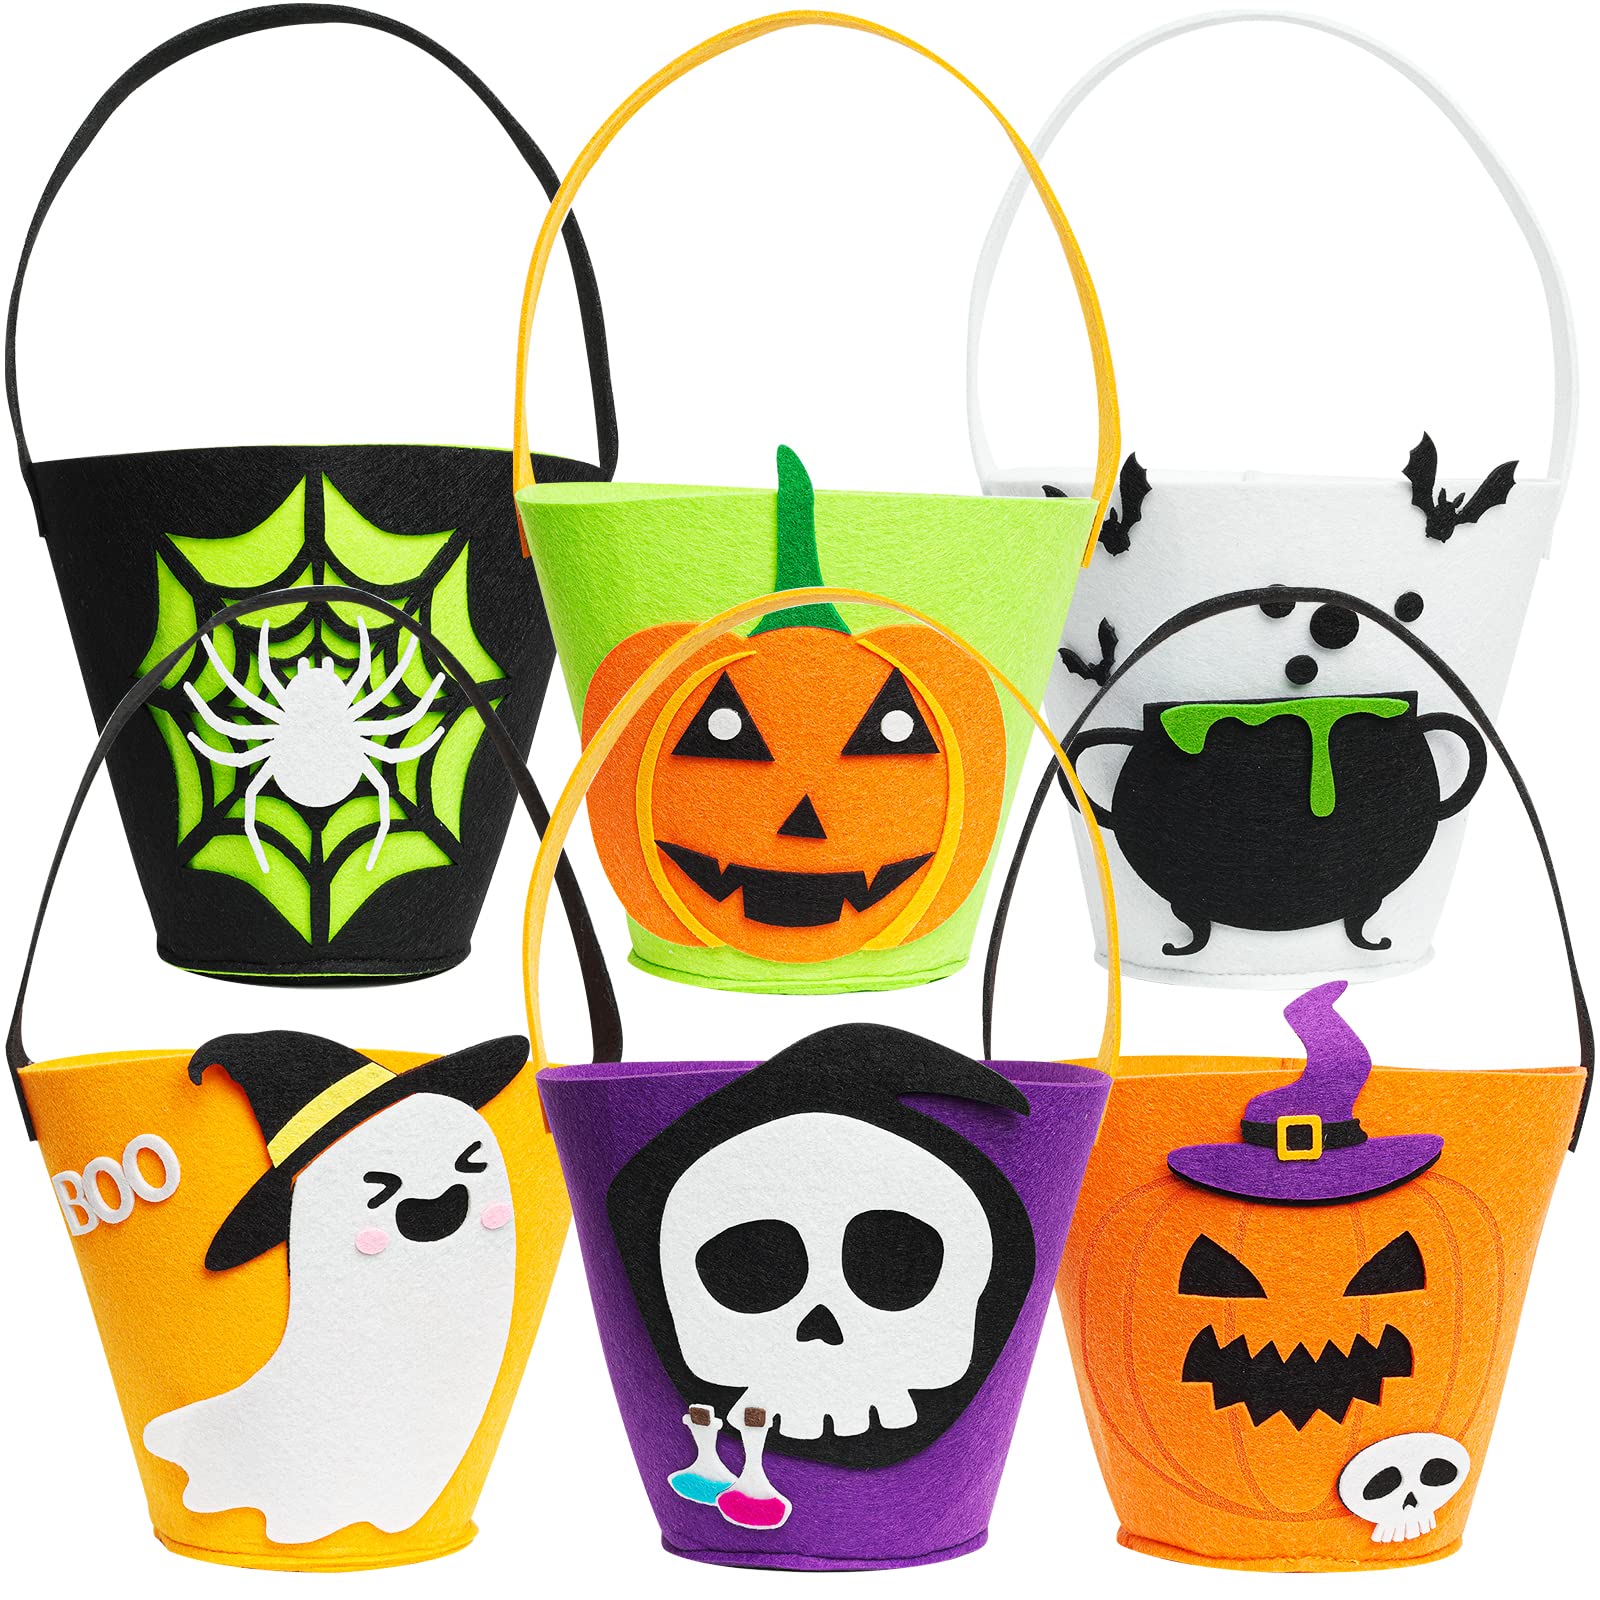 6 Pack Candy Felt Holder Buckets for Kids, Halloween Boo baskets for Trick or Treating Bags, Halloween Candy Pails, Halloween Snacks, Halloween Goodie Bags, Bucket Decoration, Spooky Baskets